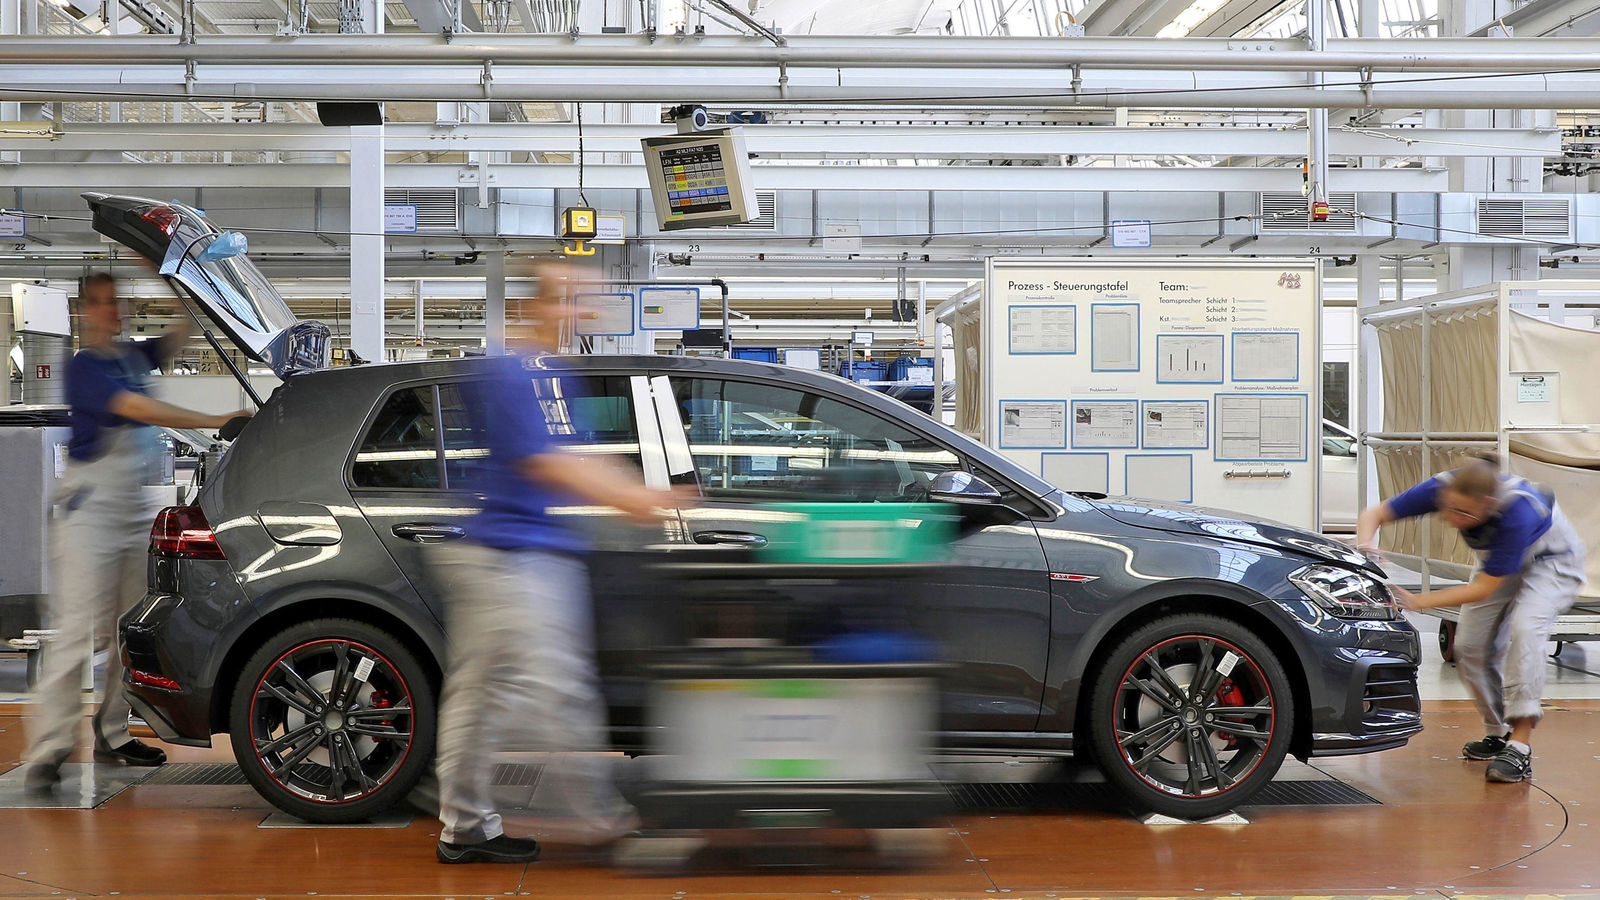 Volkswagen’s main plant in Wolfsburg wins the Automotive Lean Production Award for the first time